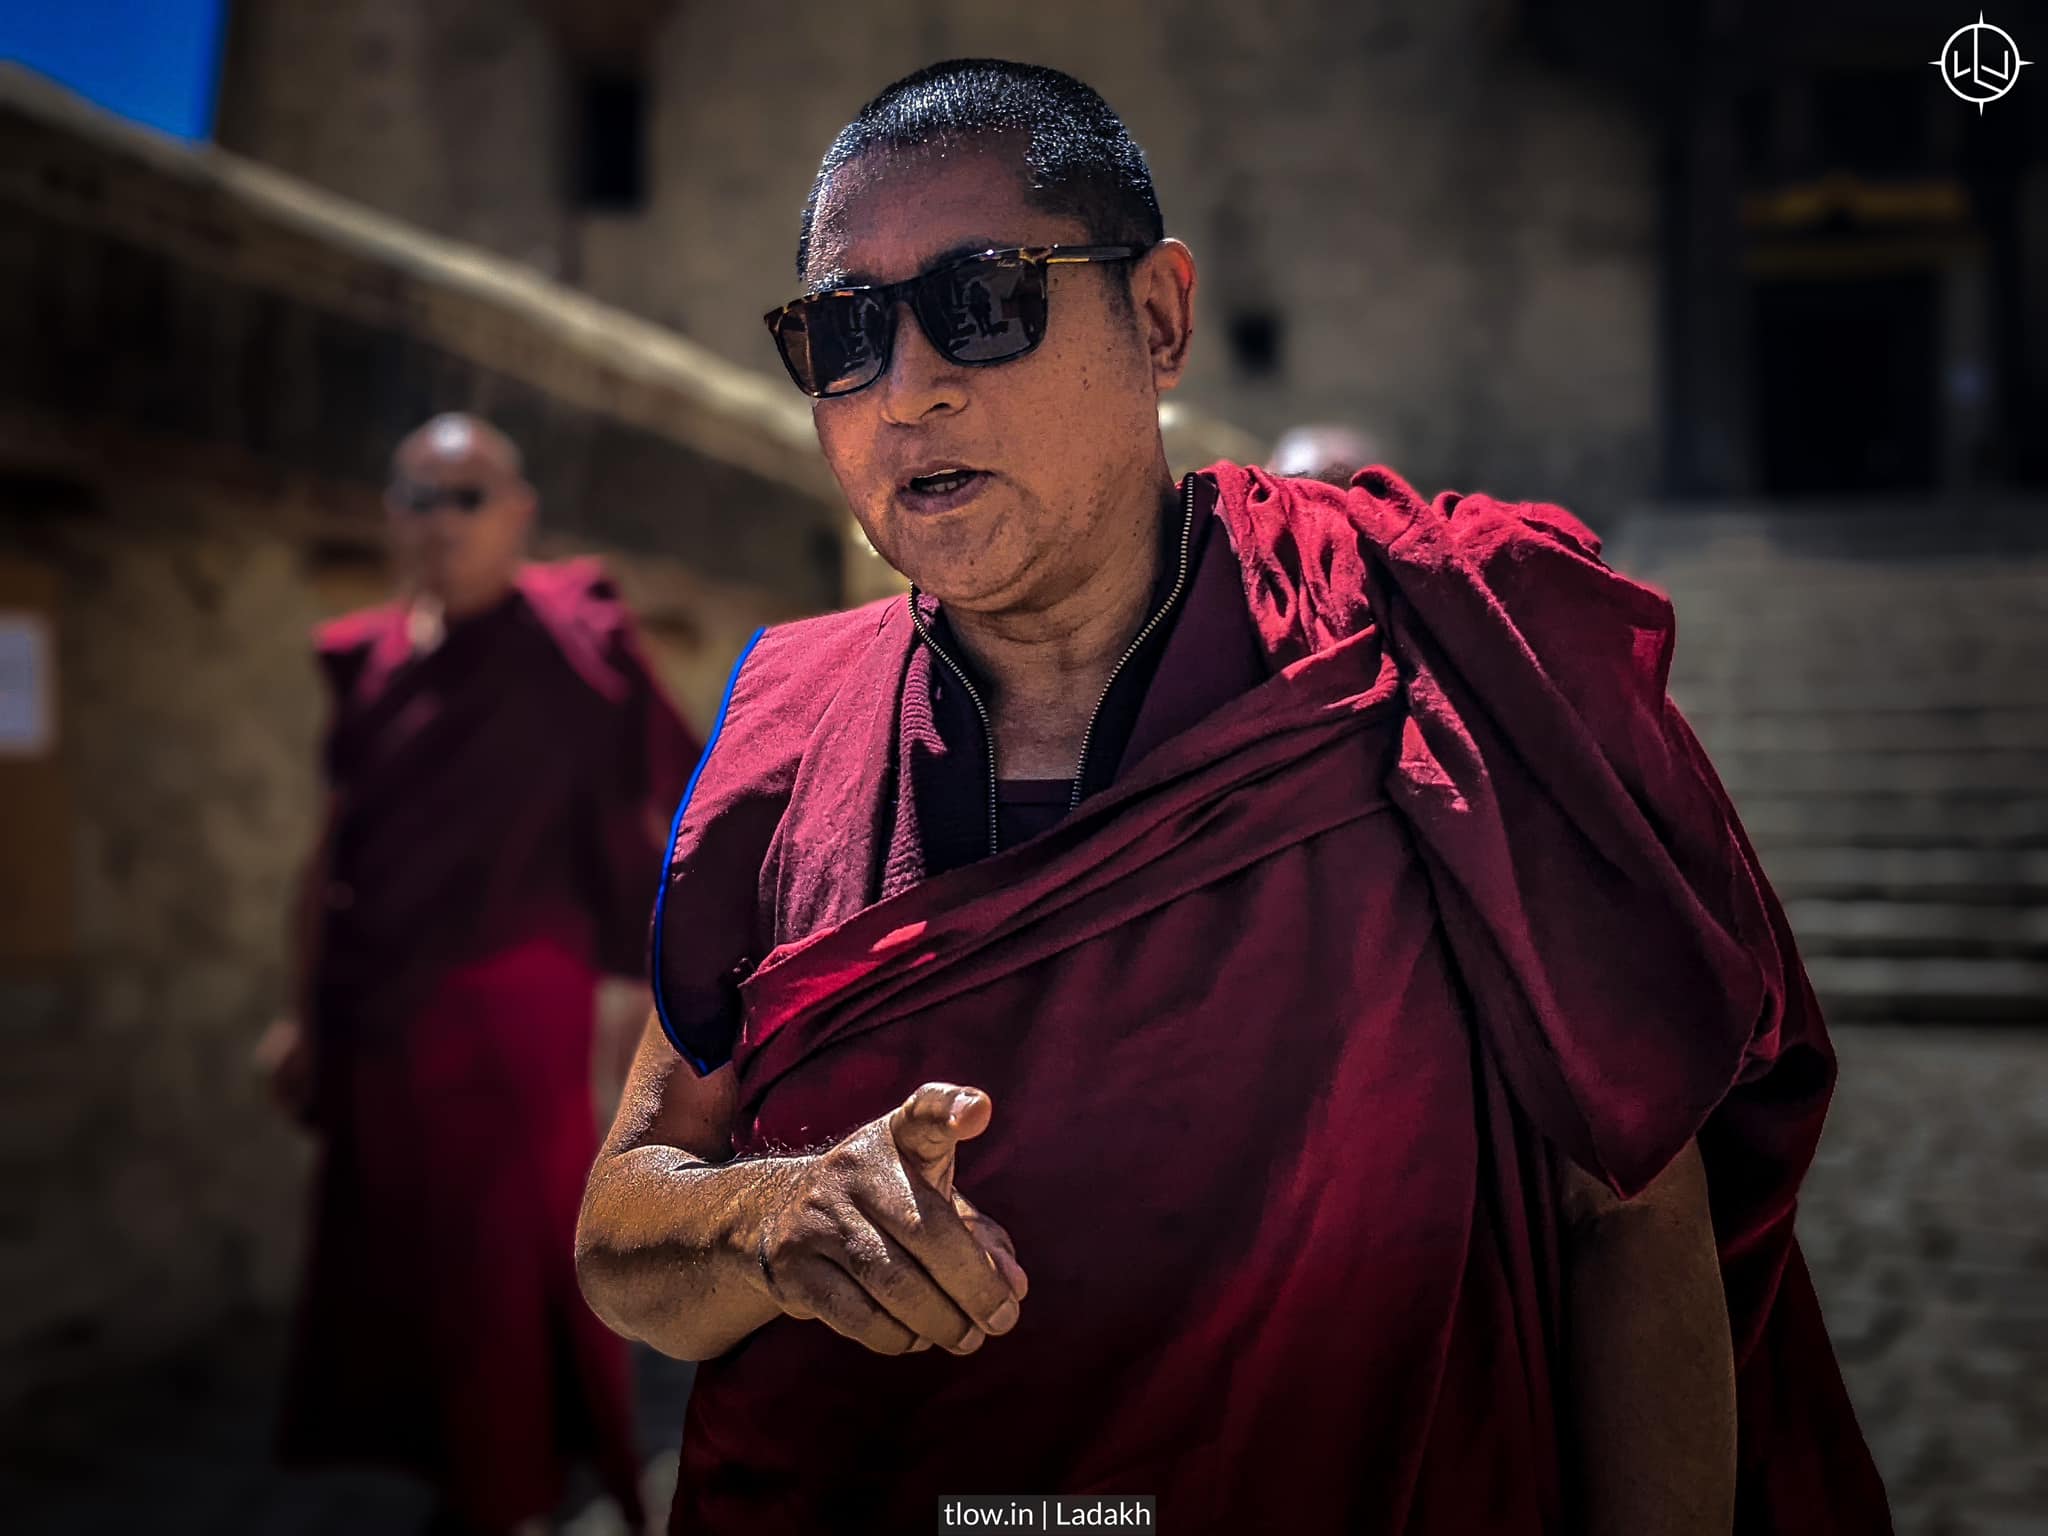 Monk from leh palace